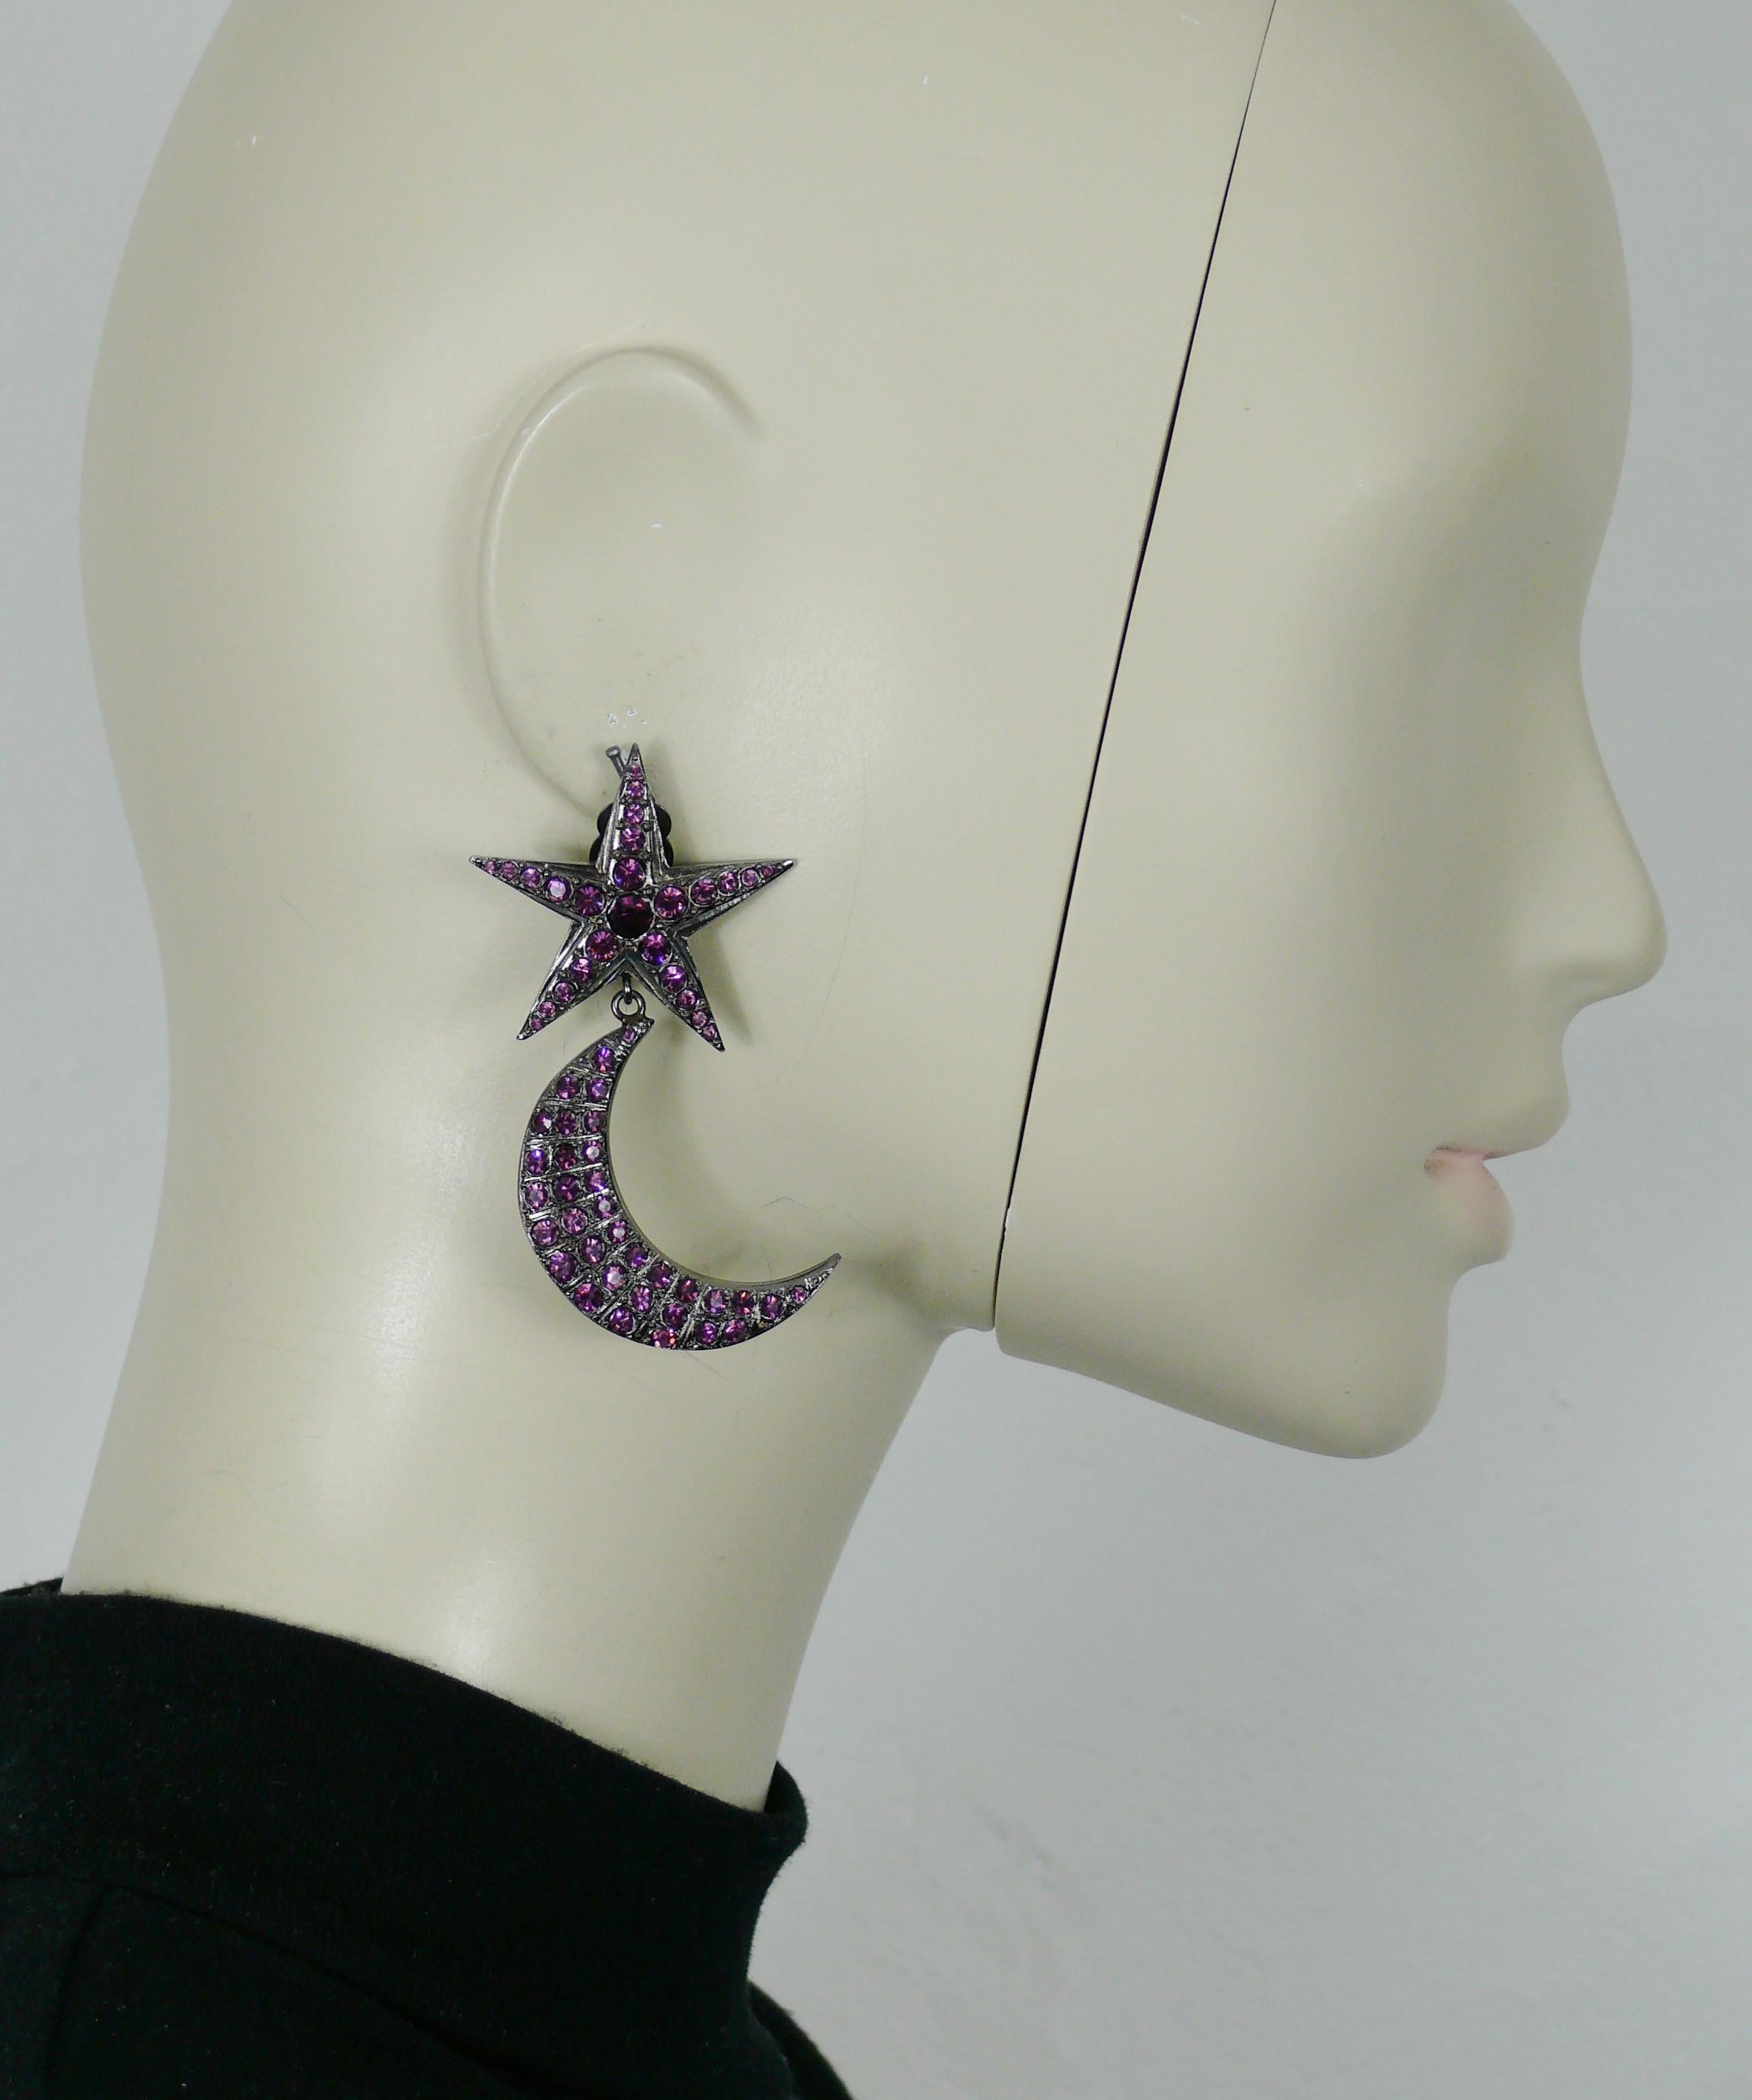 JEAN PAUL GAULTIER vintage gun tone dangling earrings (clip-on) featuring a star top and a crescent moon embellished with amethyst color crystals.

Marked GAULTIER.

Indicative measurements : max. height approx. 6.8 cm (2.68 inches) / max. width